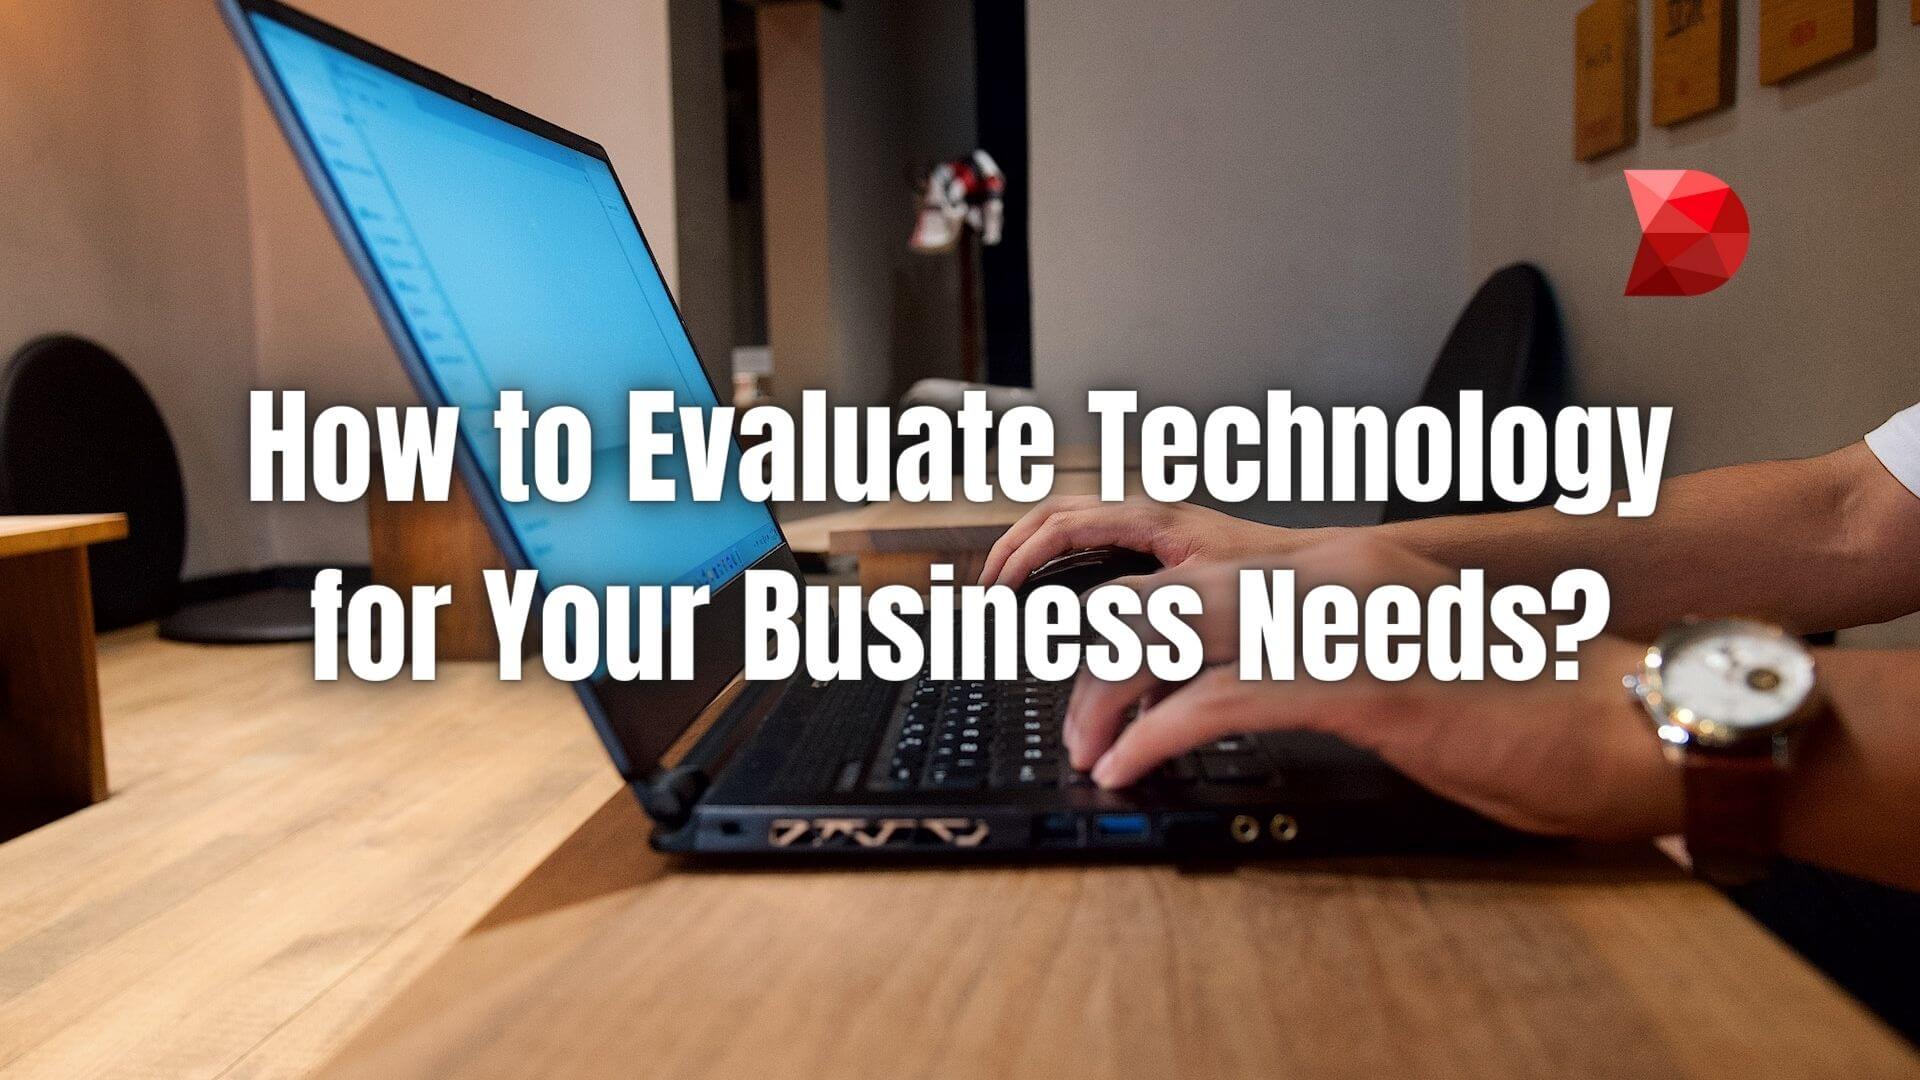 How can you accurately and effectively evaluate technology and decide whether to adopt, invest in, or use it? Here are some tips to help you!